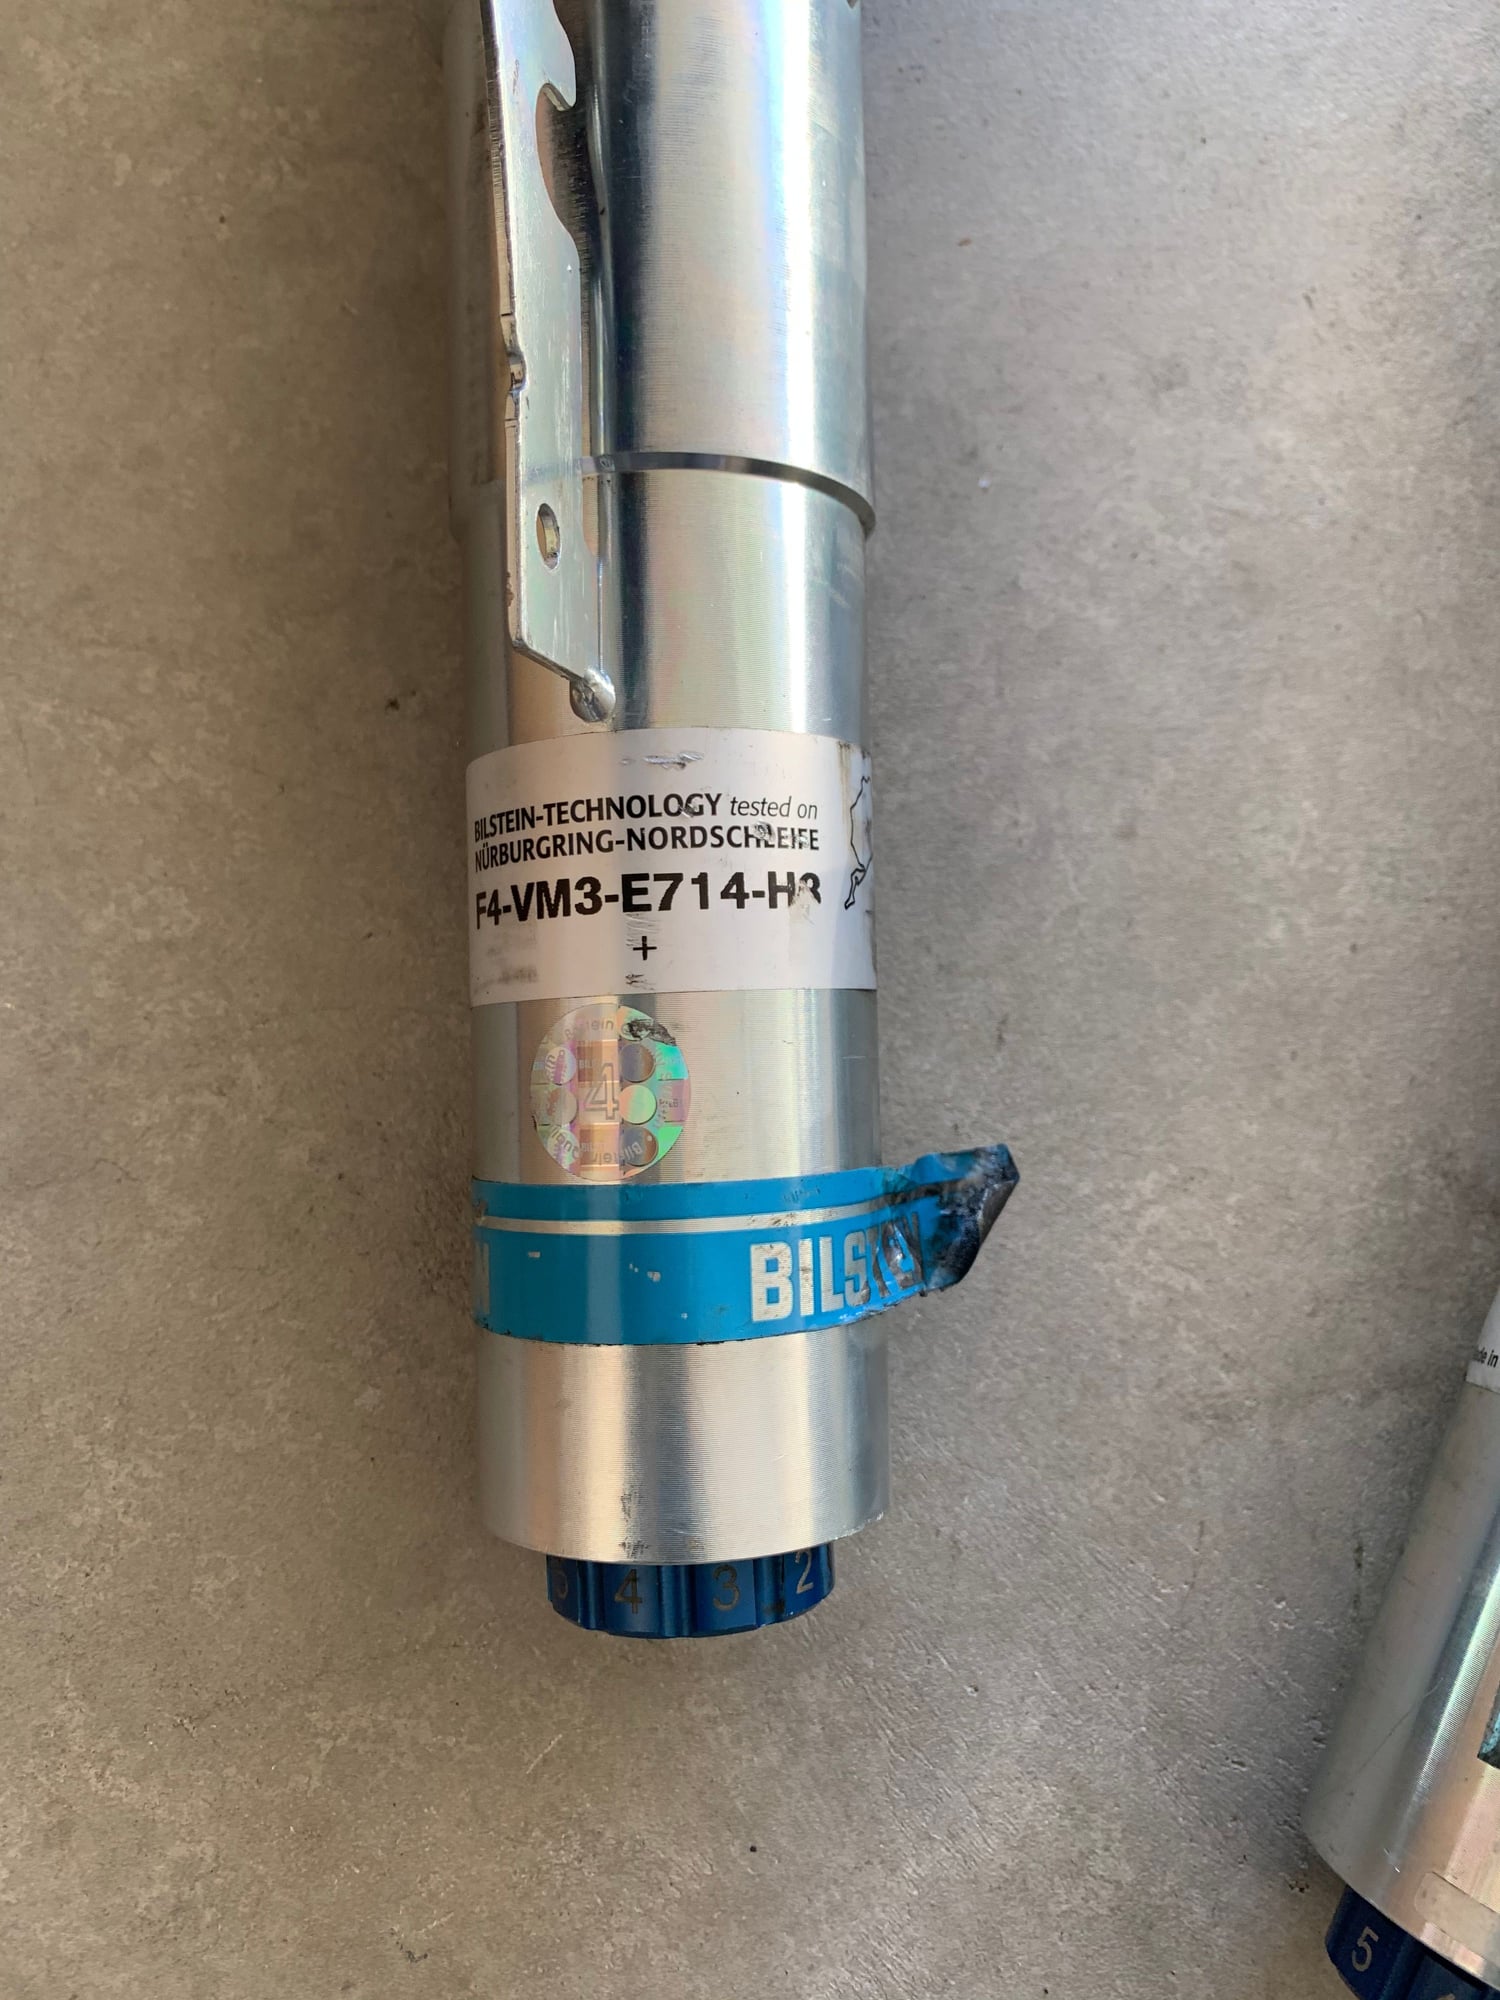 Steering/Suspension - For Sale Bilstein PSS10 coilover set up for 996 Turbo - Used - 2001 to 2004 Porsche 911 - Santa Clarita/los Angeles, CA 91350, United States